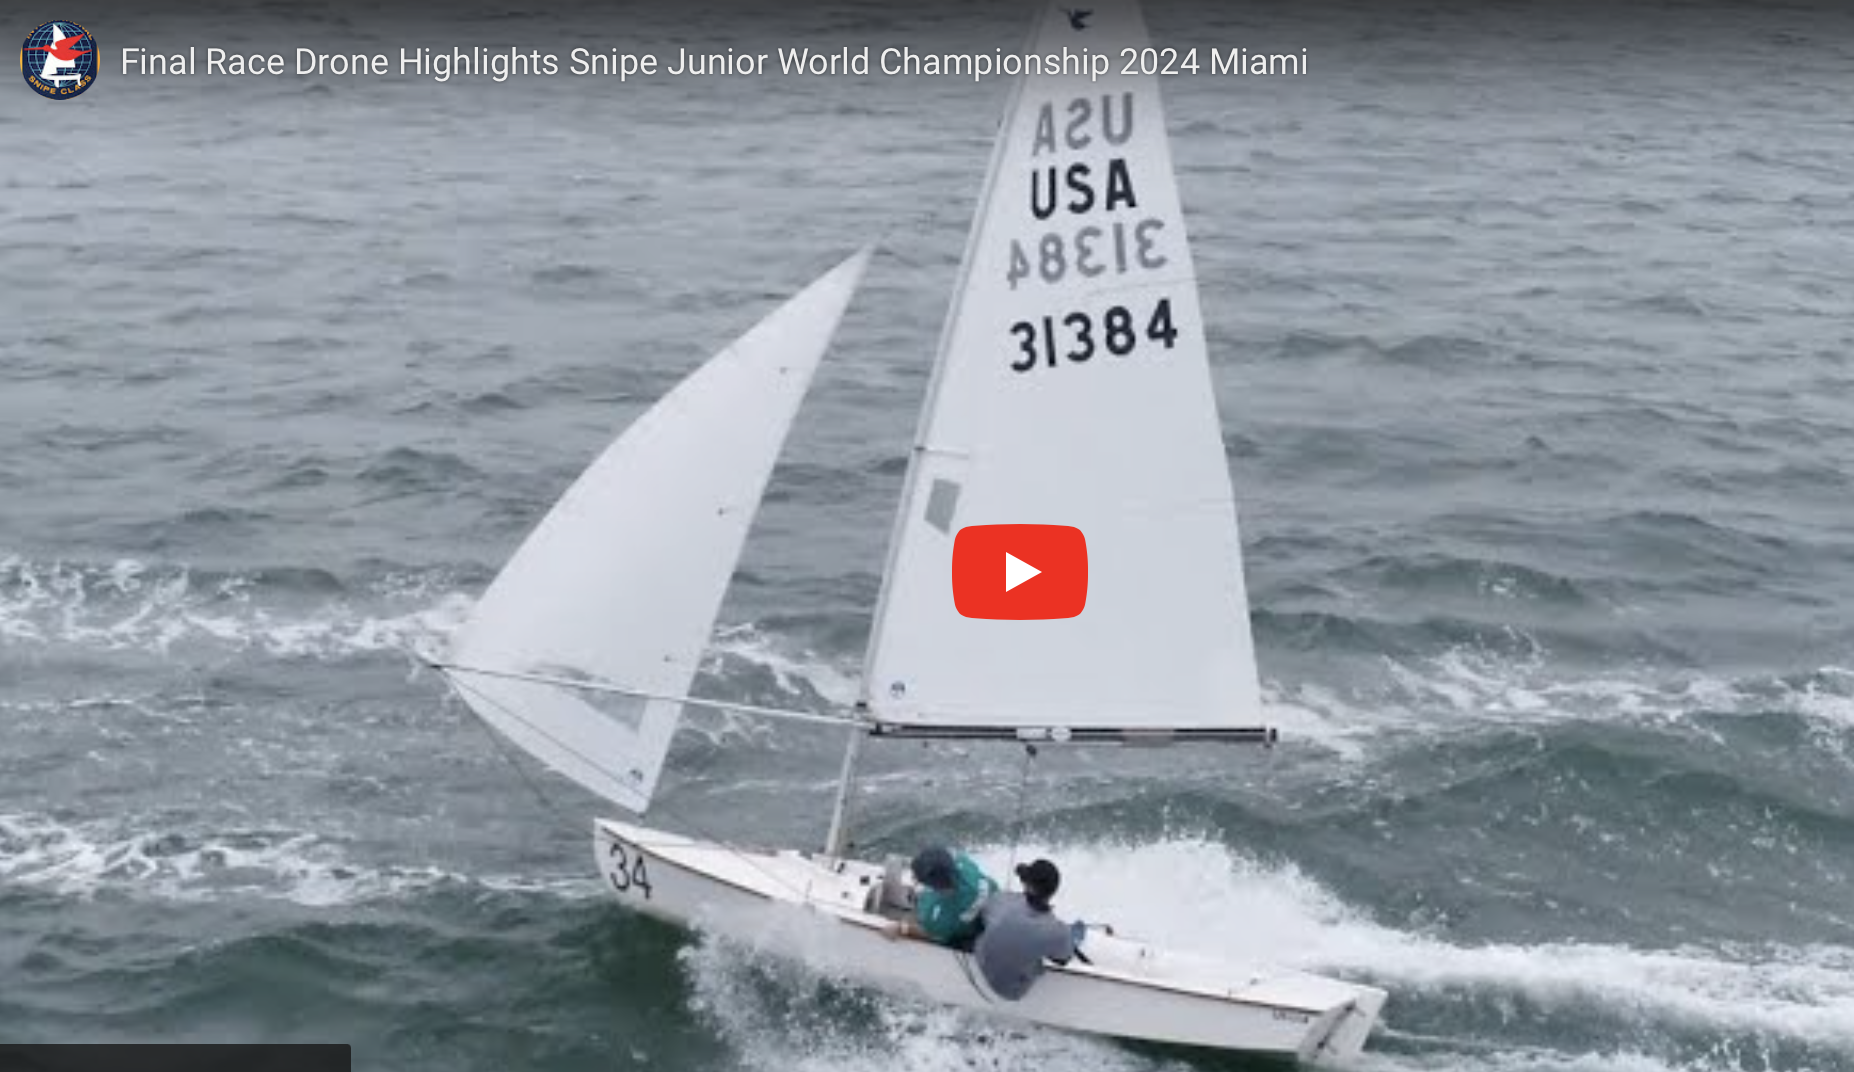 Snipe Junior Worlds Highlights – Final Race Drone Video Image